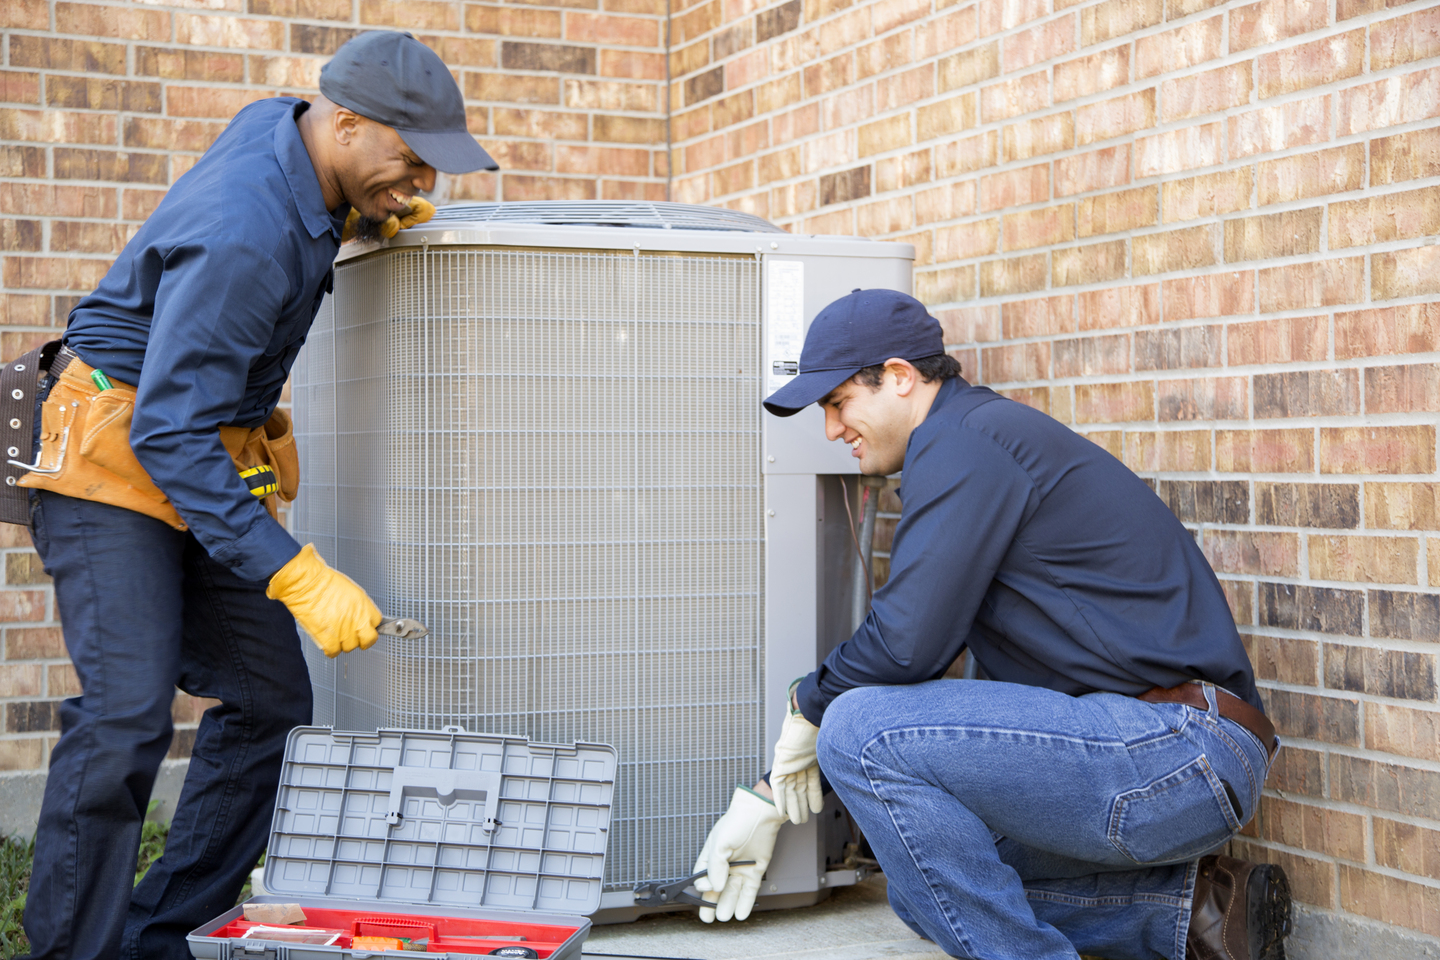 Multiethnic team of repairmen fixing a gray, freestanding air conditioning unit near a brick wall